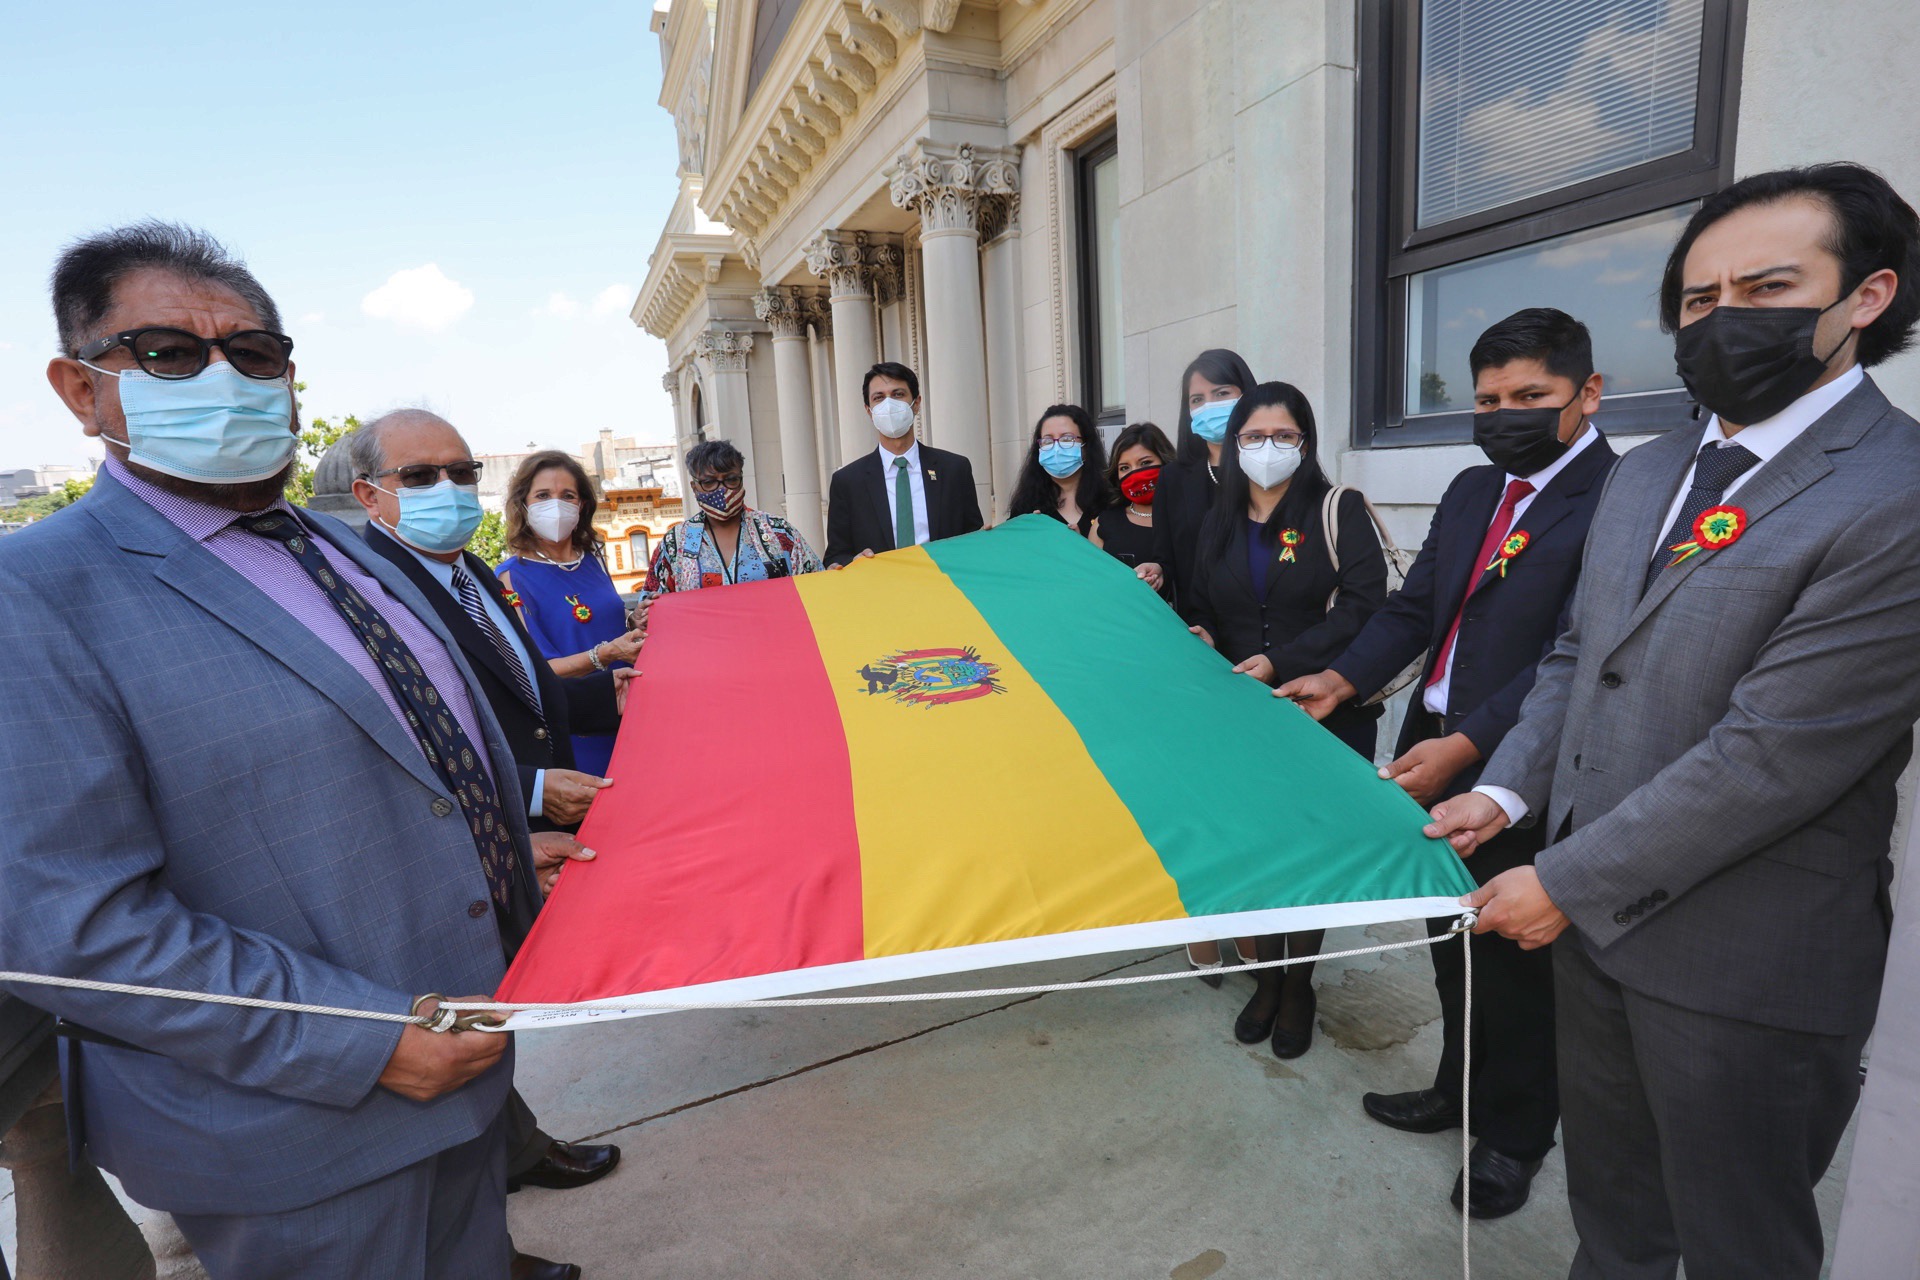 Bolivian Flag Raising Group of people hold the flag before it is raised. The national flag of Bolivia is described as a tricolor rectangle, with the colors red, yellow and green. The nationa seal appears in the center of the yellow stripe.